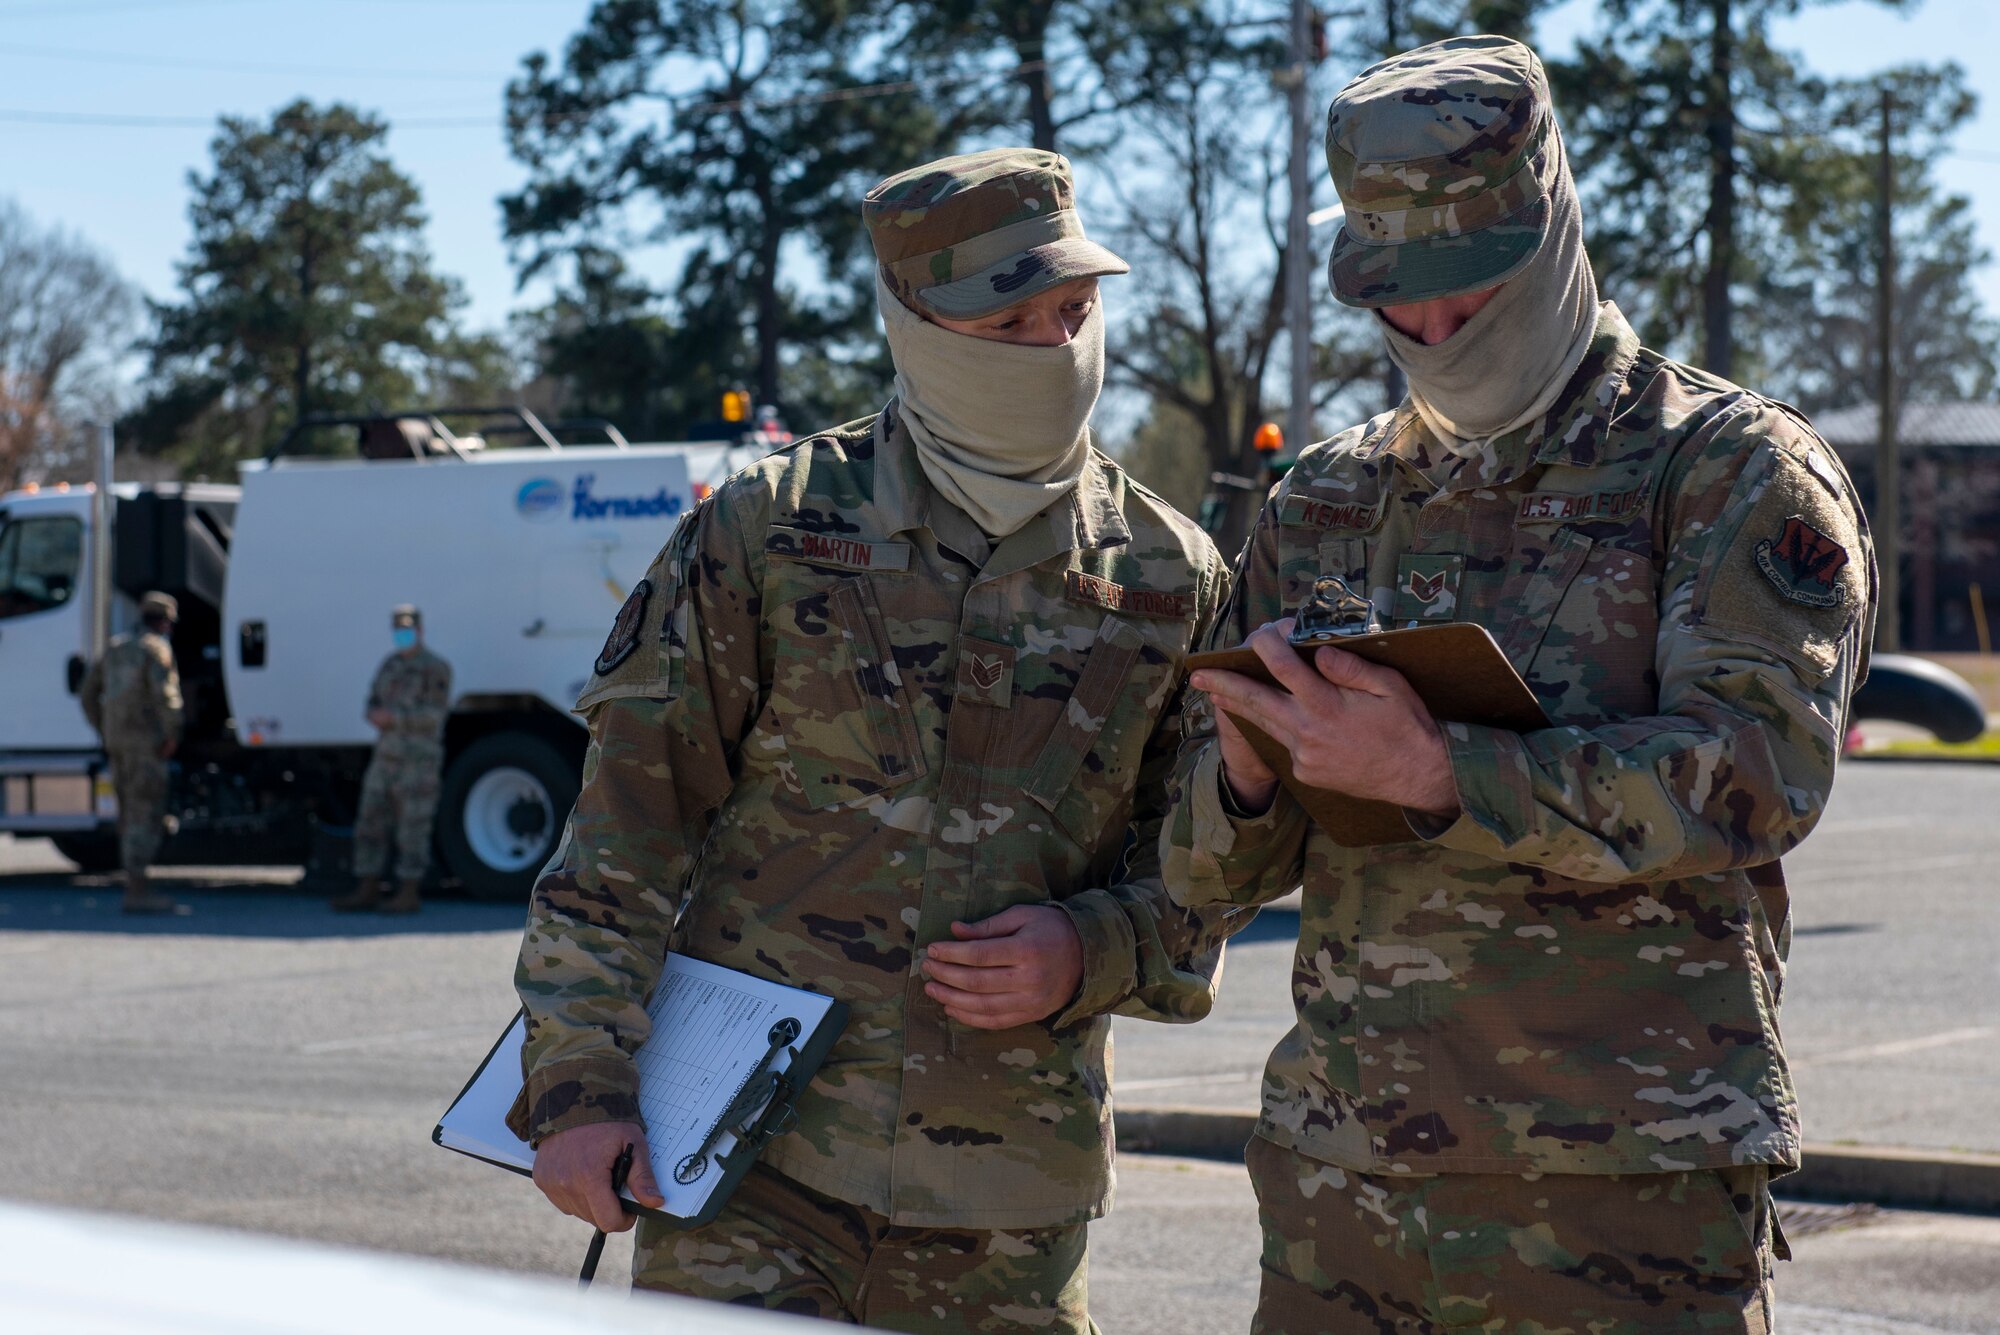 Airmen from the 4th Logistics Readiness Squadron use a check list to grade vehicles during a Vehicle Inspection Roll-By competition at Seymour Johnson Air Force Base, North Carolina, March 8, 2021.